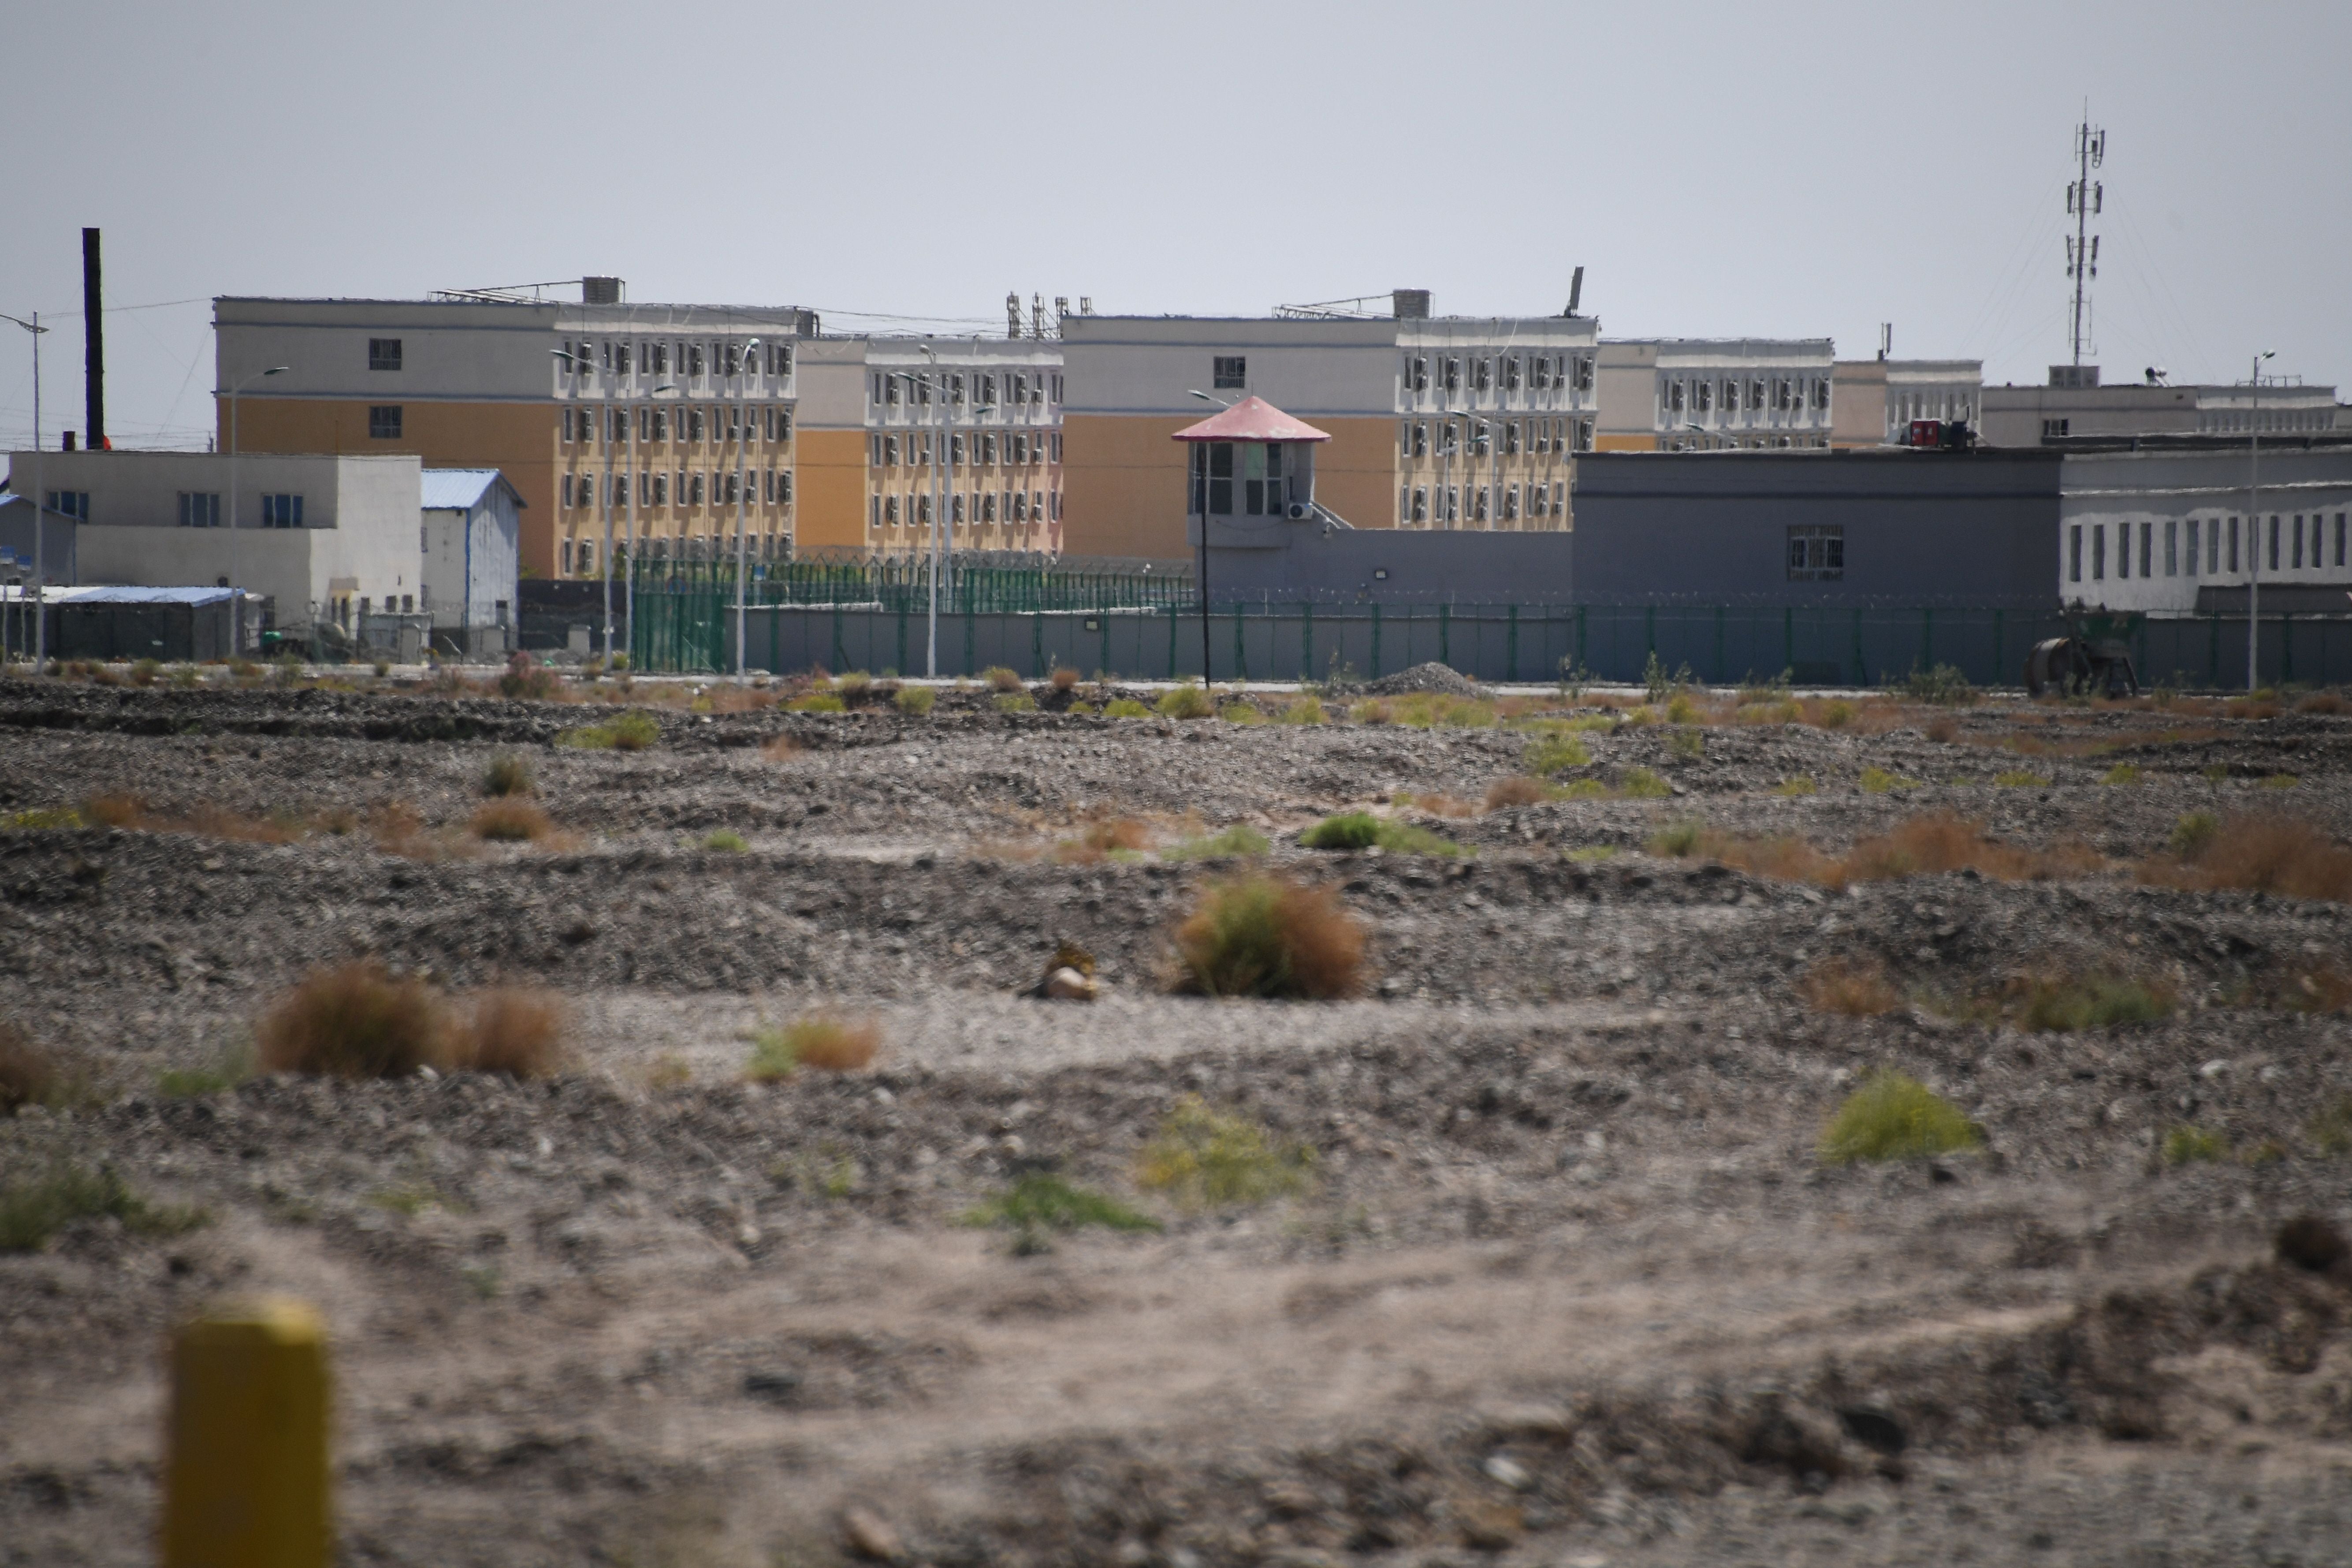 This file photo shows a facility believed to be a re-education camp where mostly Muslim ethnic minorities are detained in Xinjiang